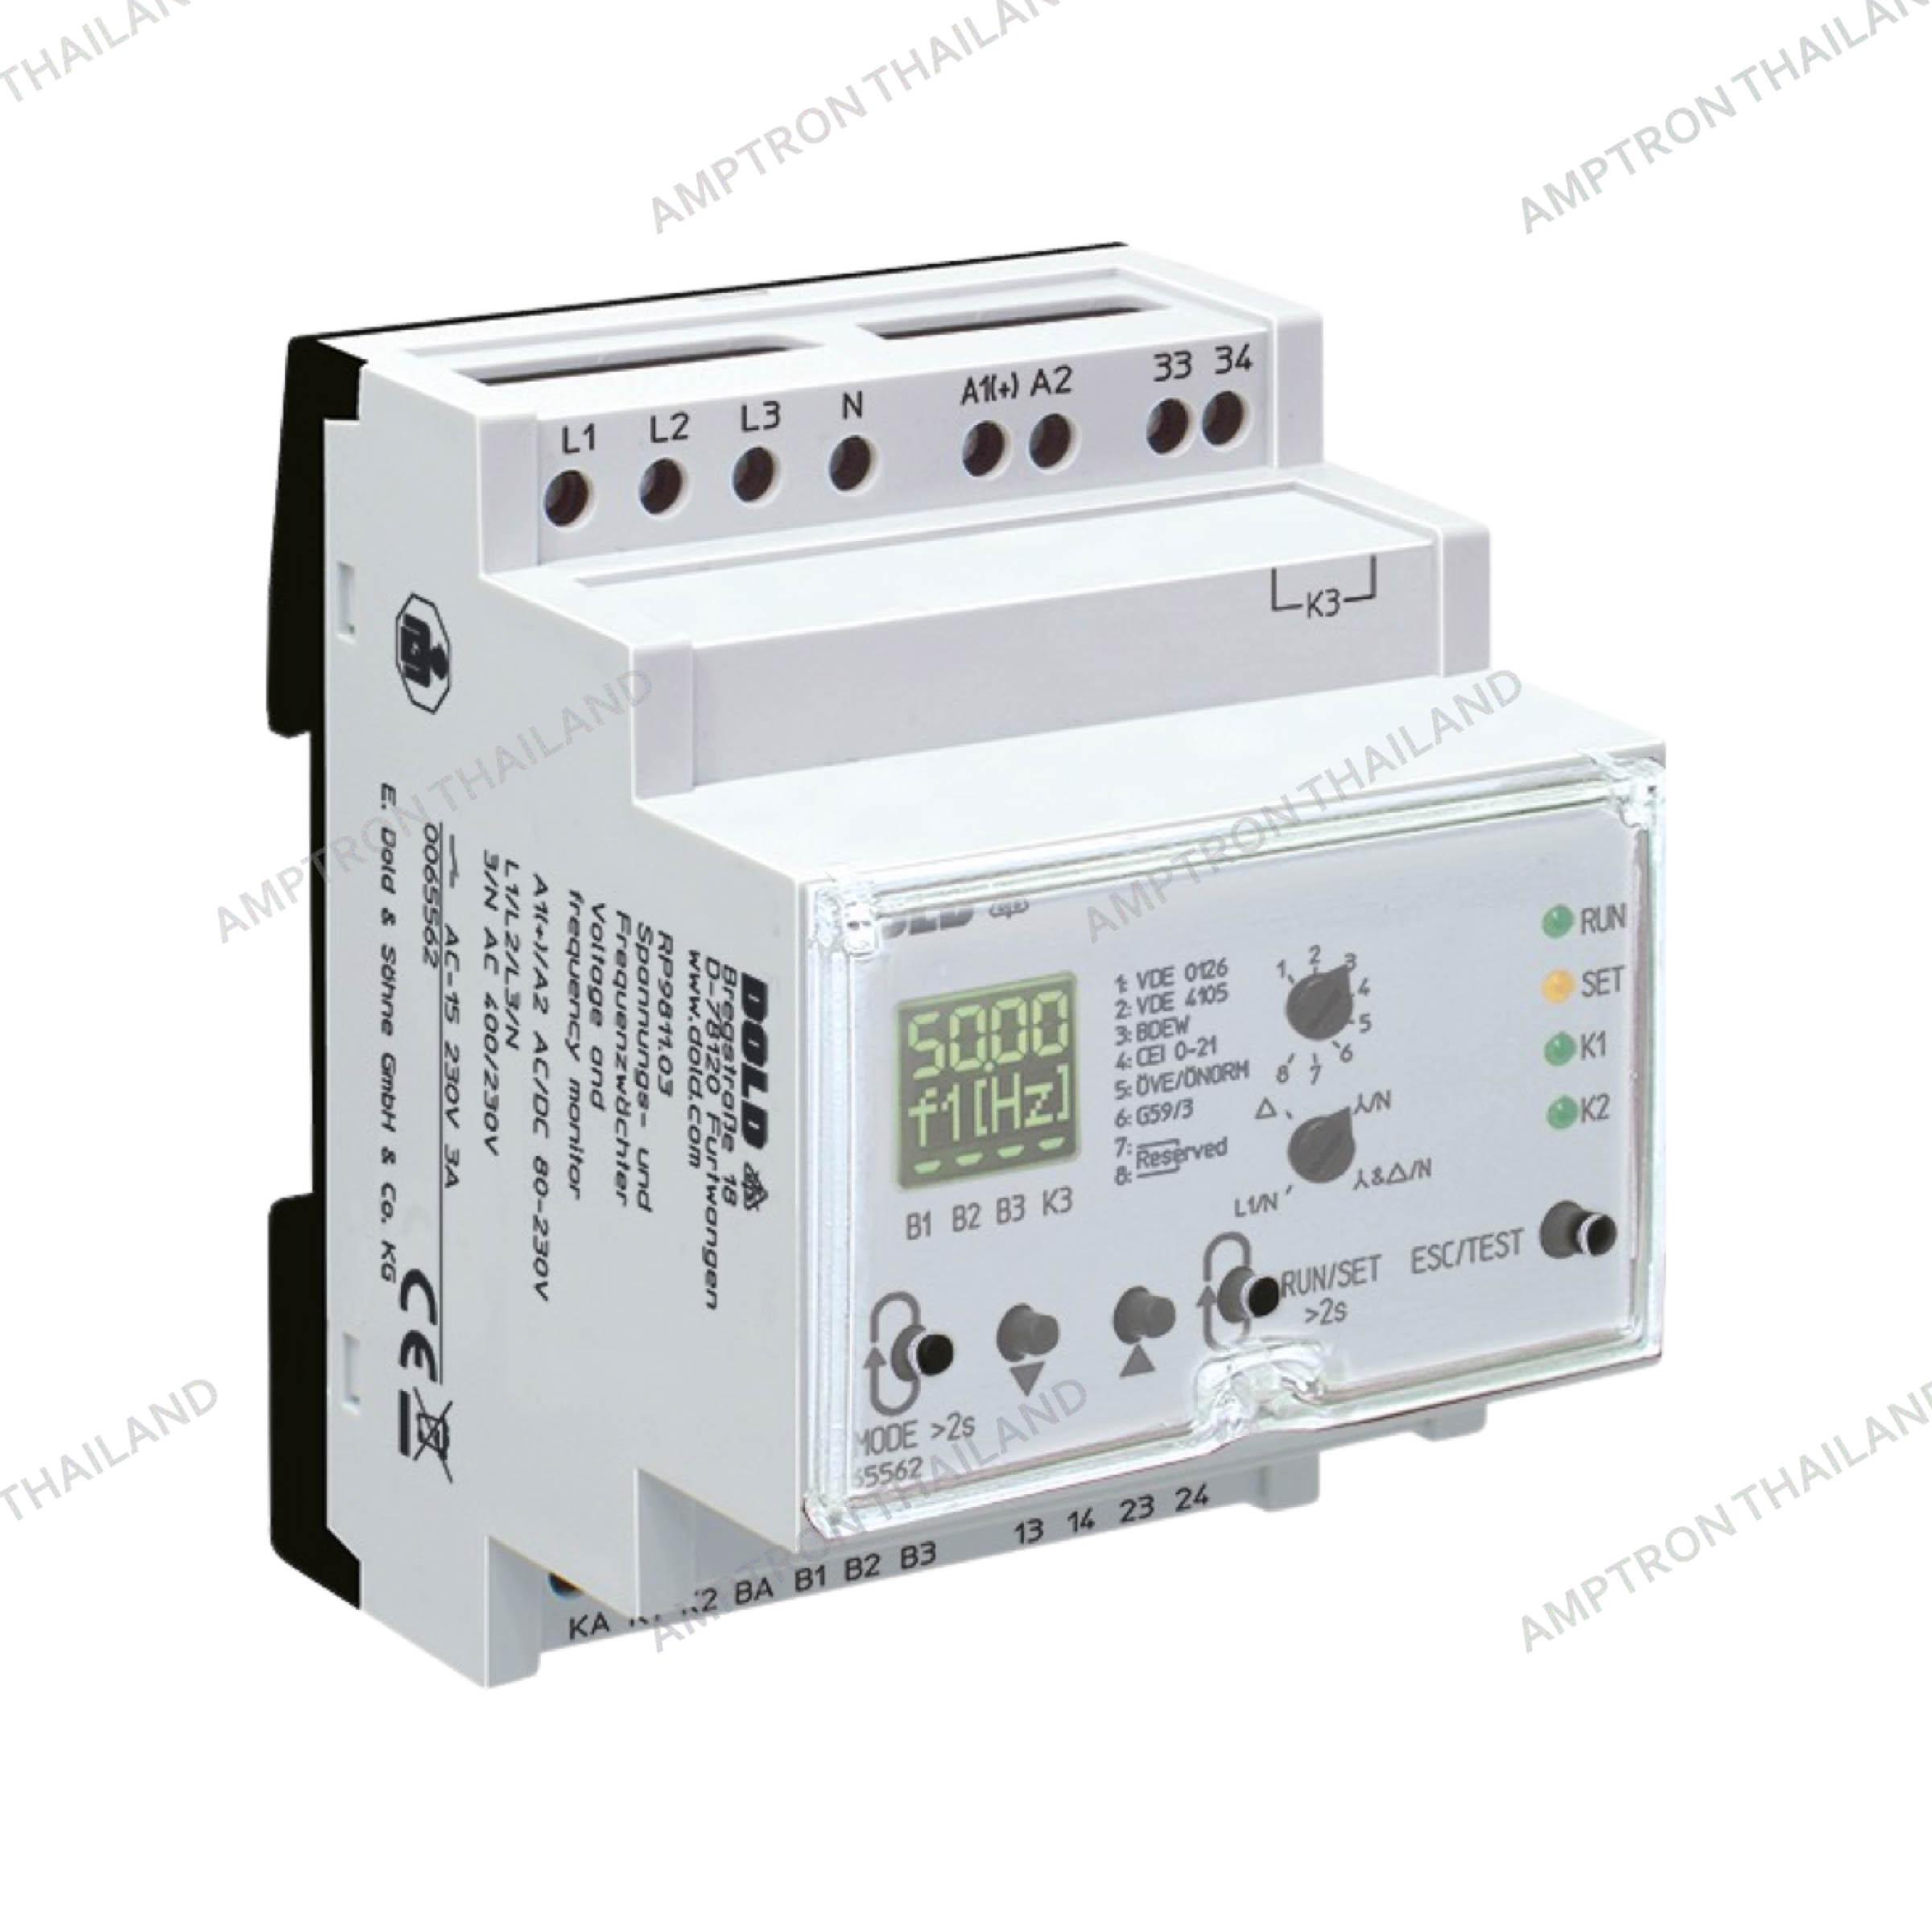 RP 9811 Varimeter  NA Voltage and Frequency Monitor